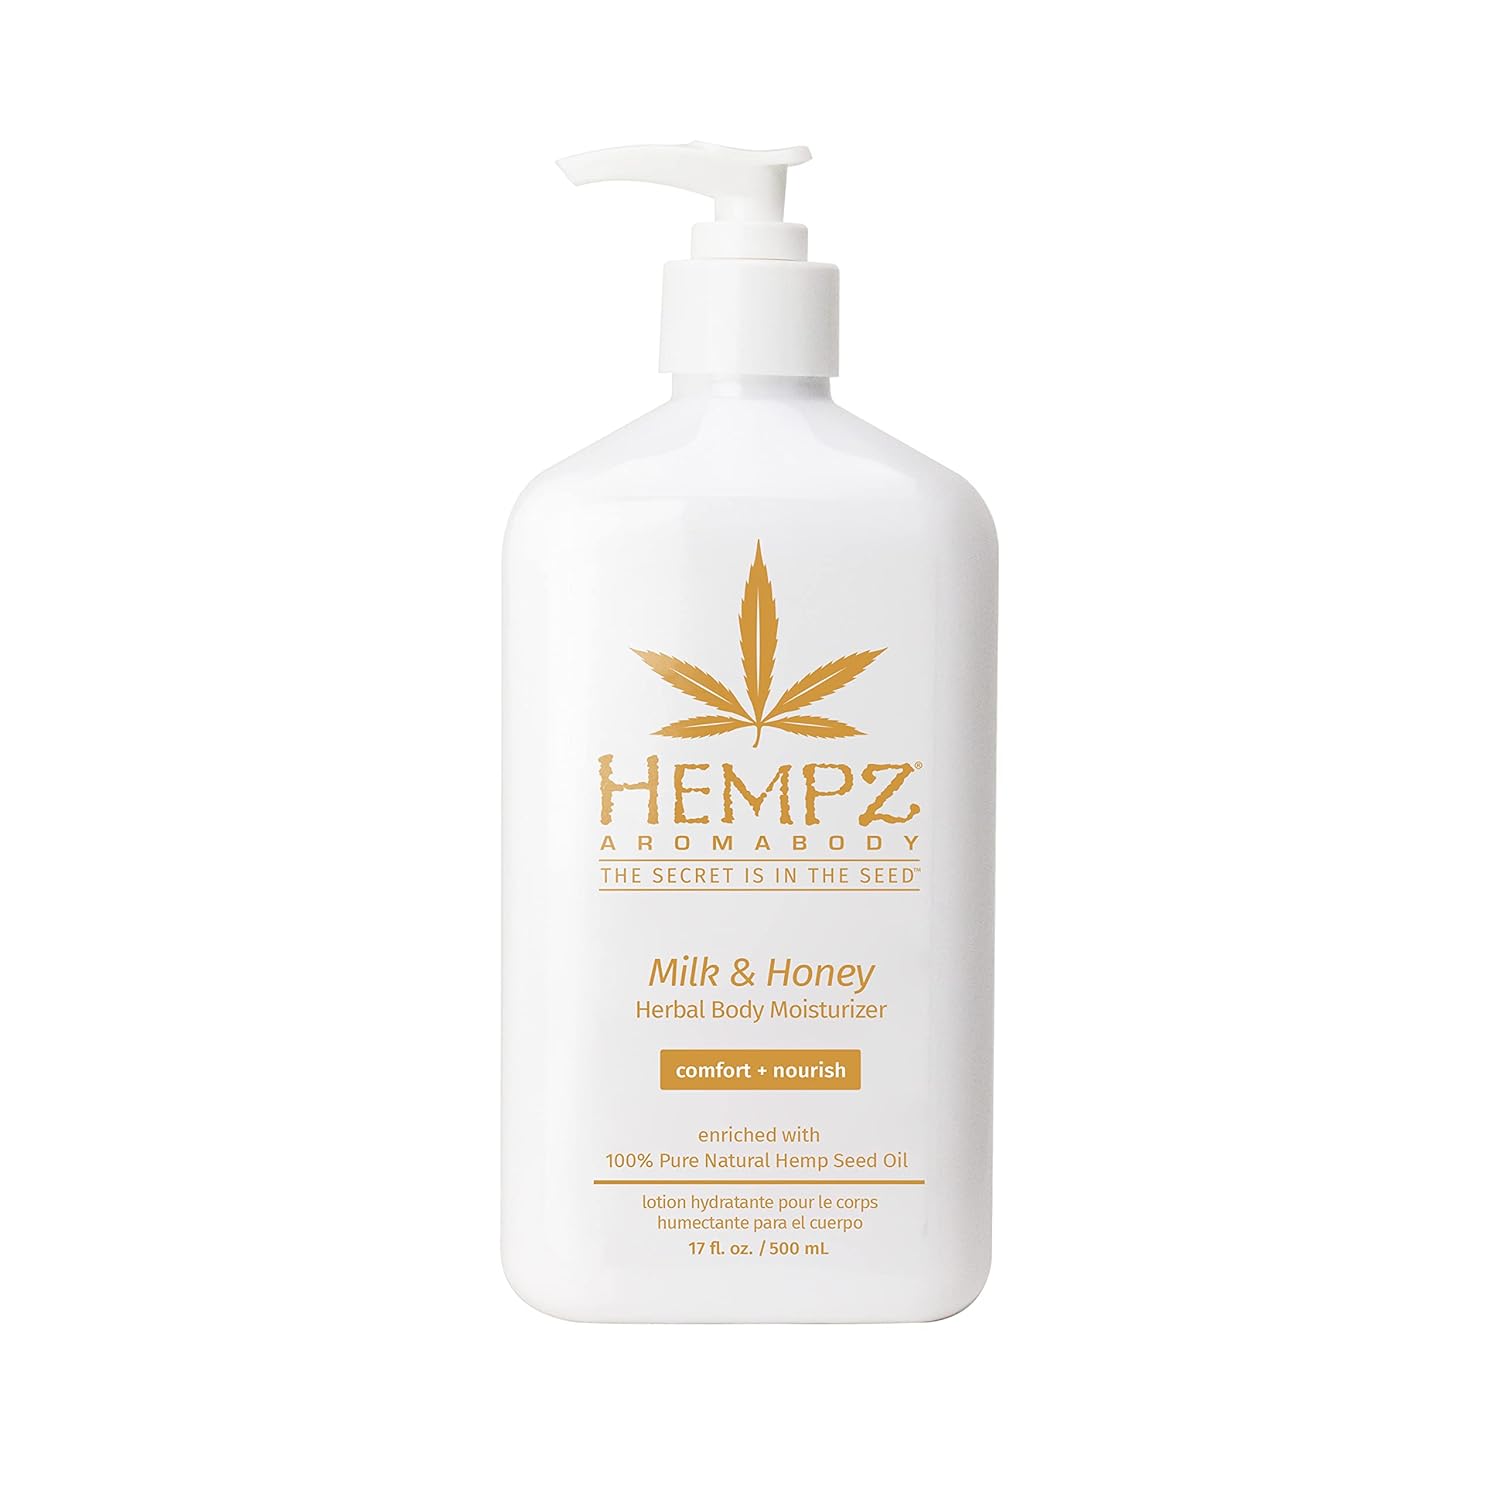 Hempz Milk & Honey Herbal Body Moisturizer with Jojoba Seed, Cocoa Butter, 17 . - Fragranced, Everyday Body Lotion with Agave Extract to Hydrate Sensitive Skin - Premium Skin Care Products